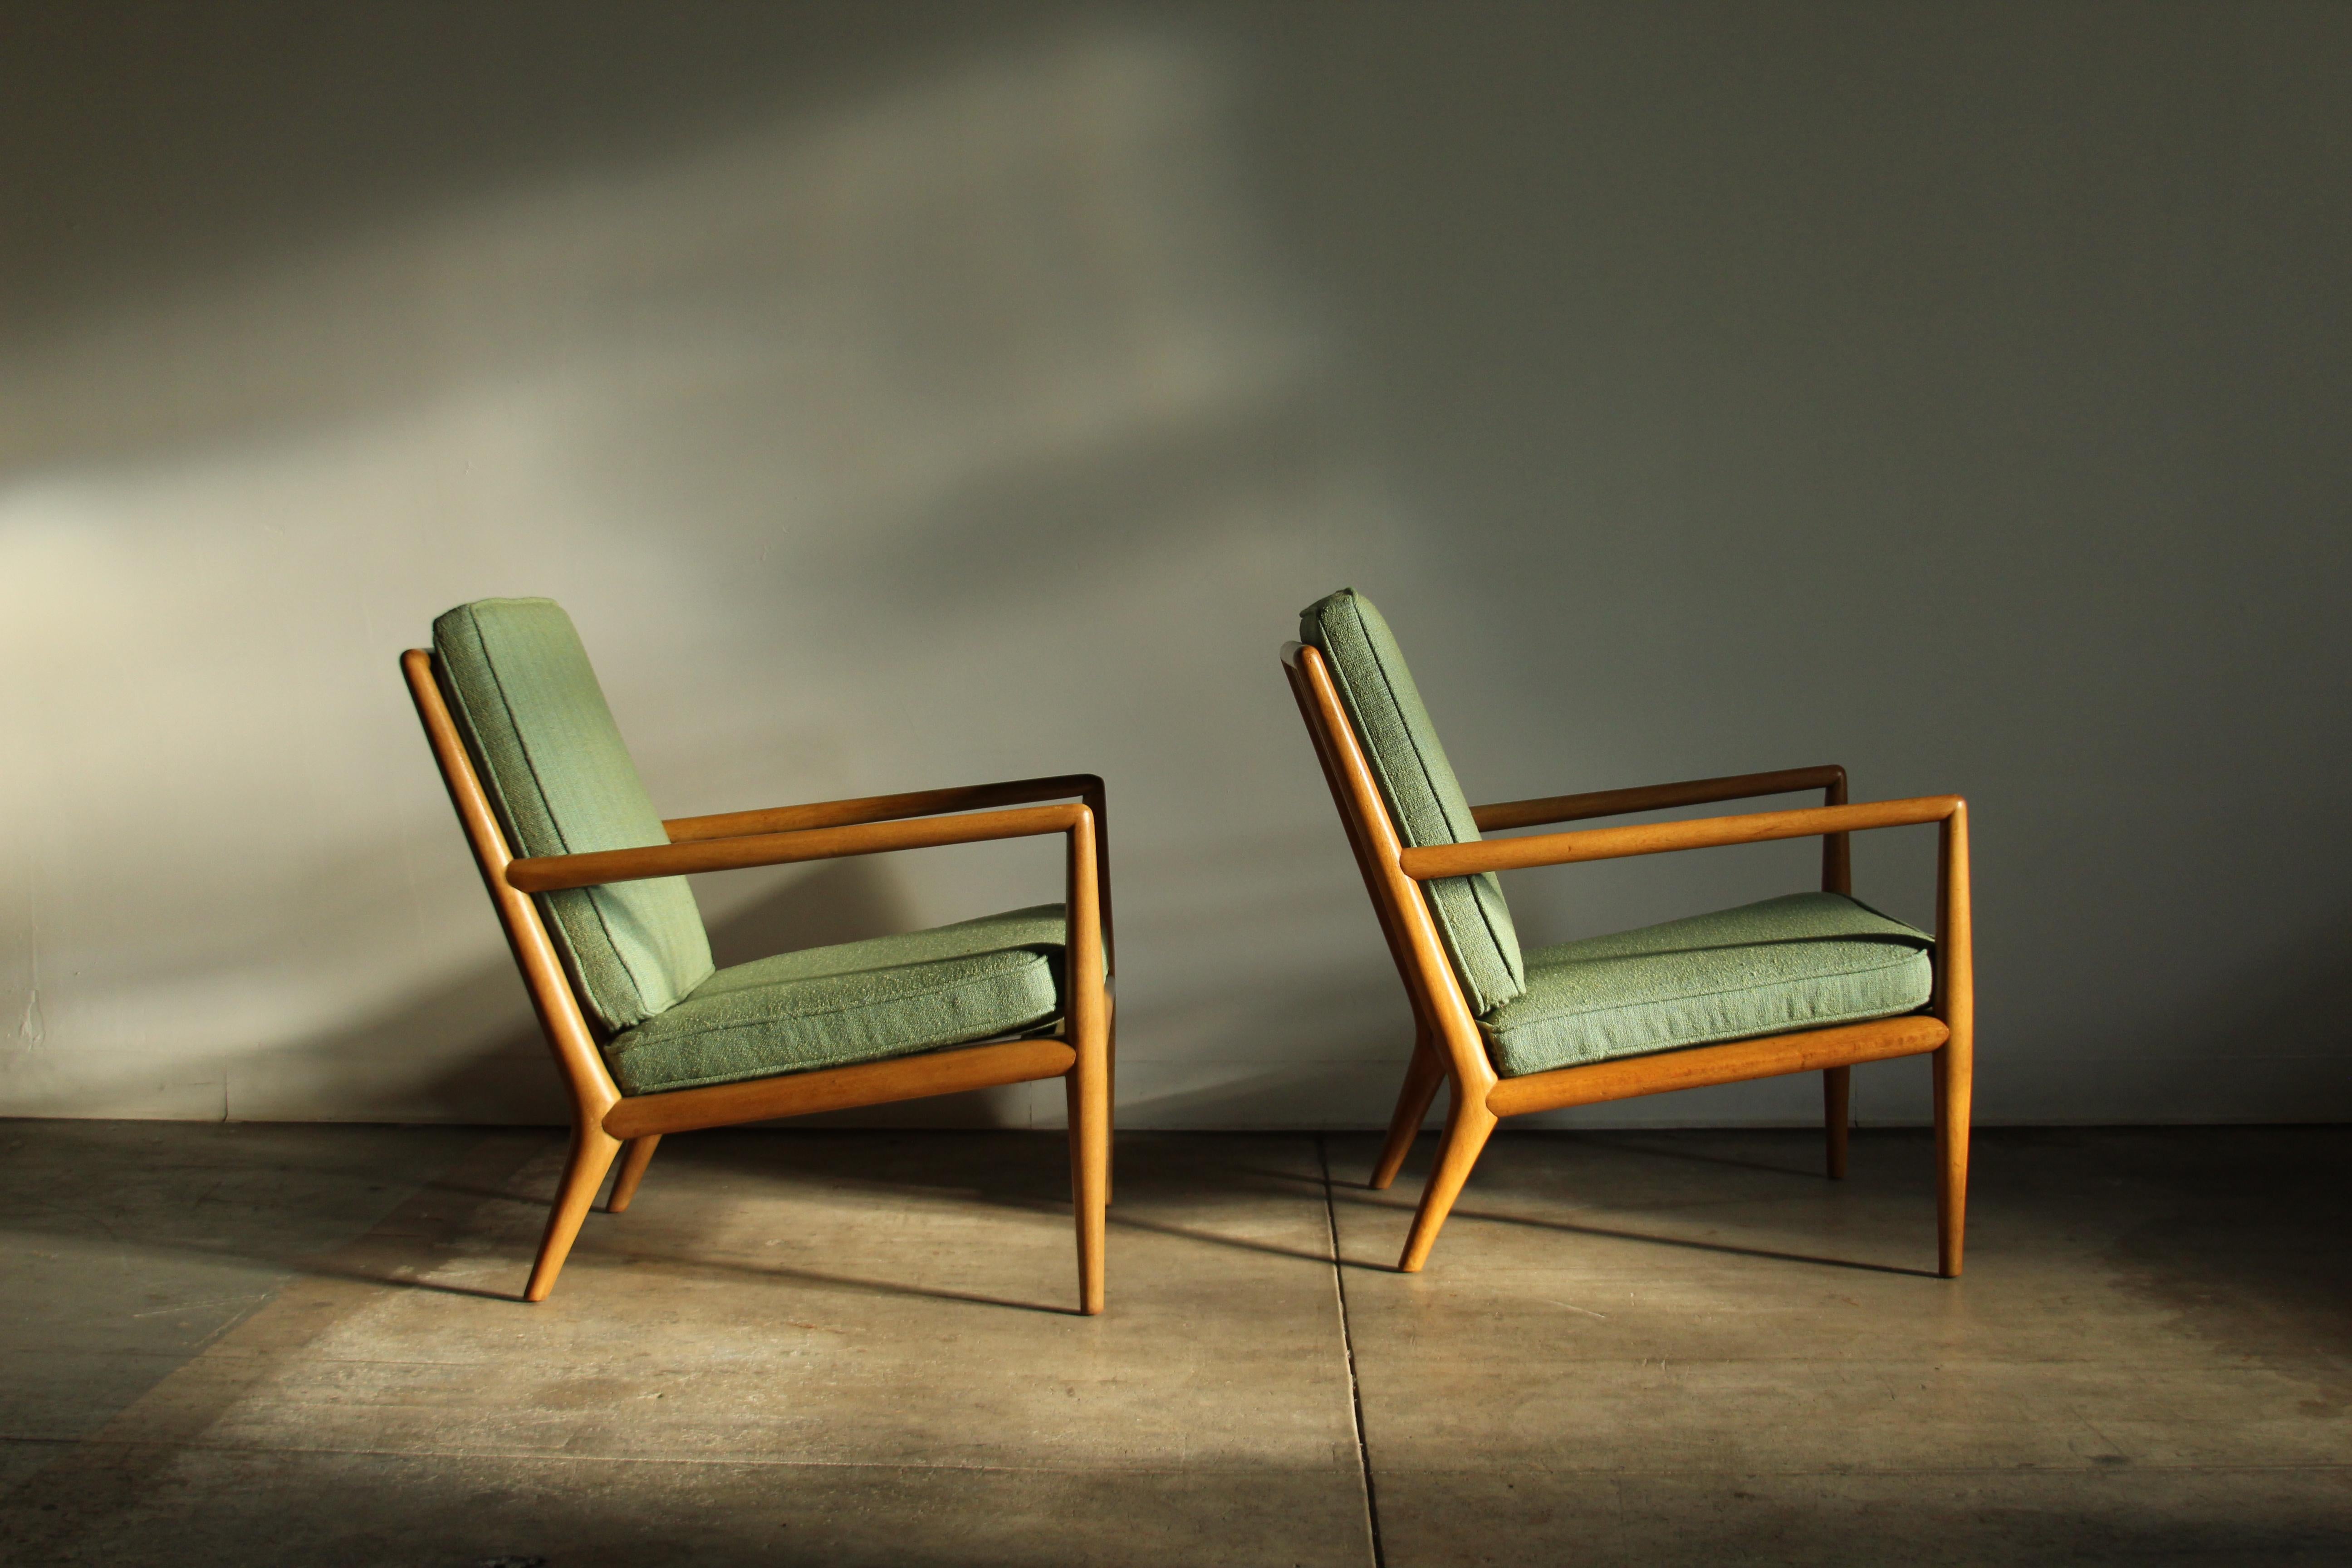 A lovely pair of lounge chairs by T.H. Robsjohn-Gibbings for Widdicomb circa 1950s. These stunning beauties boast a totally sculptural frame with angular arms and thick spindled backs. Notice how the sculpted arms smoothly cascade down into the